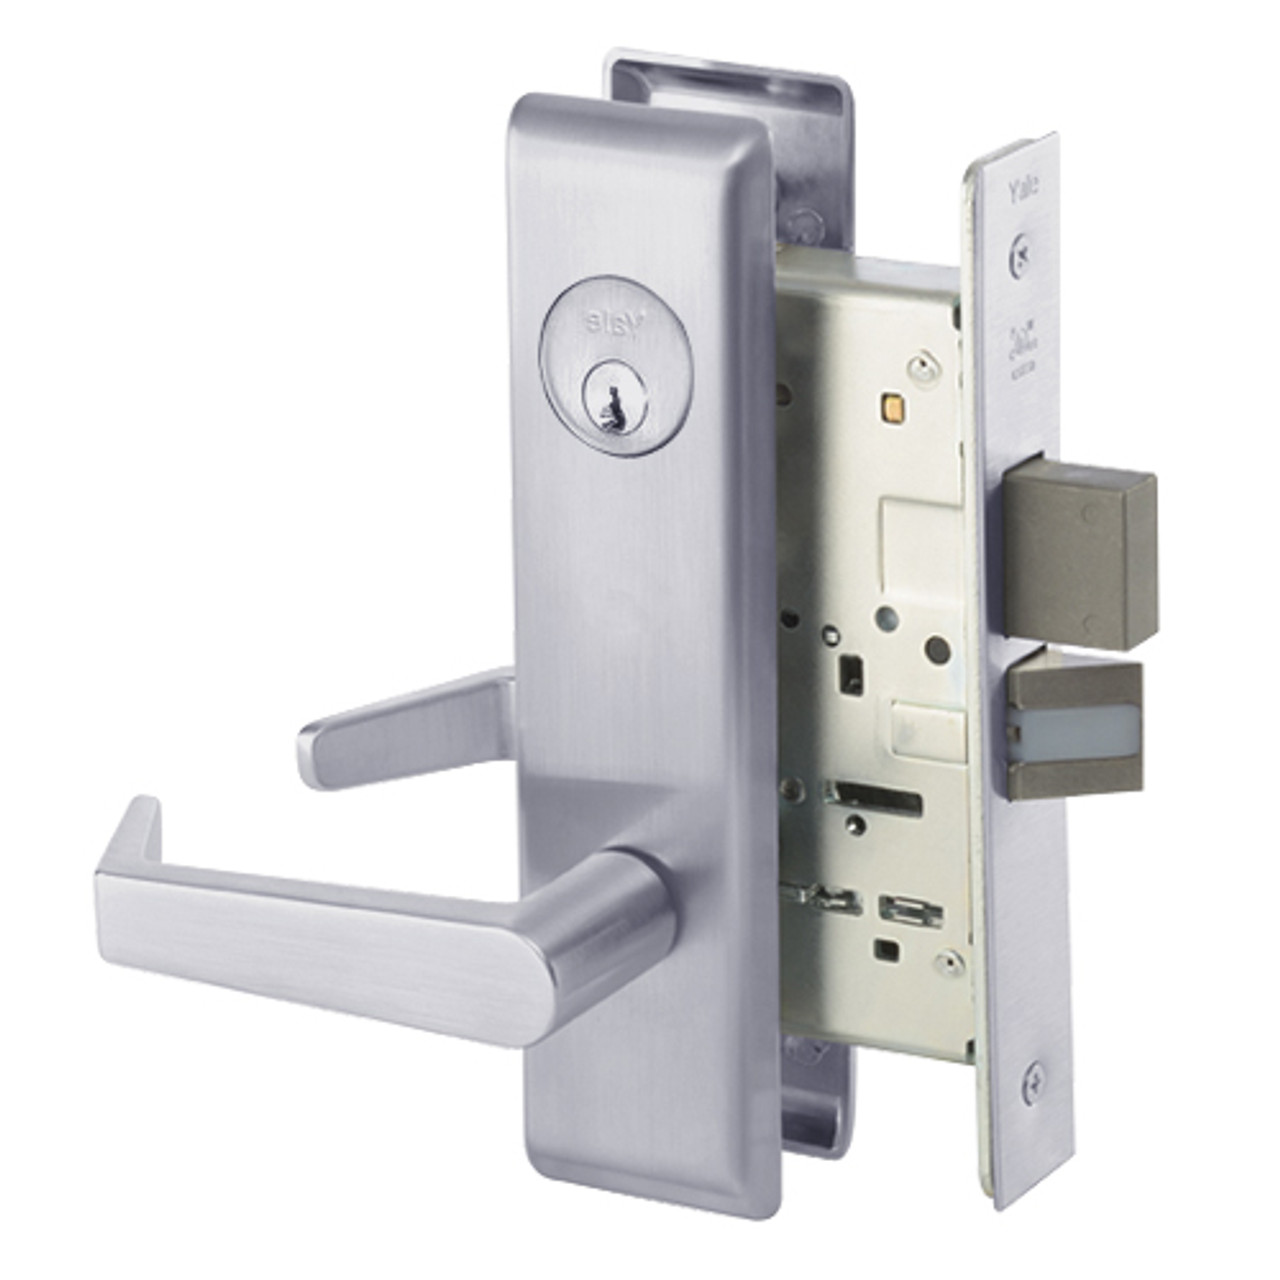 AUCN8822FL-626 Yale 8800FL Series Single Cylinder with Deadbolt Mortise Bathroom Lock with Indicator with Augusta Lever in Satin Chrome